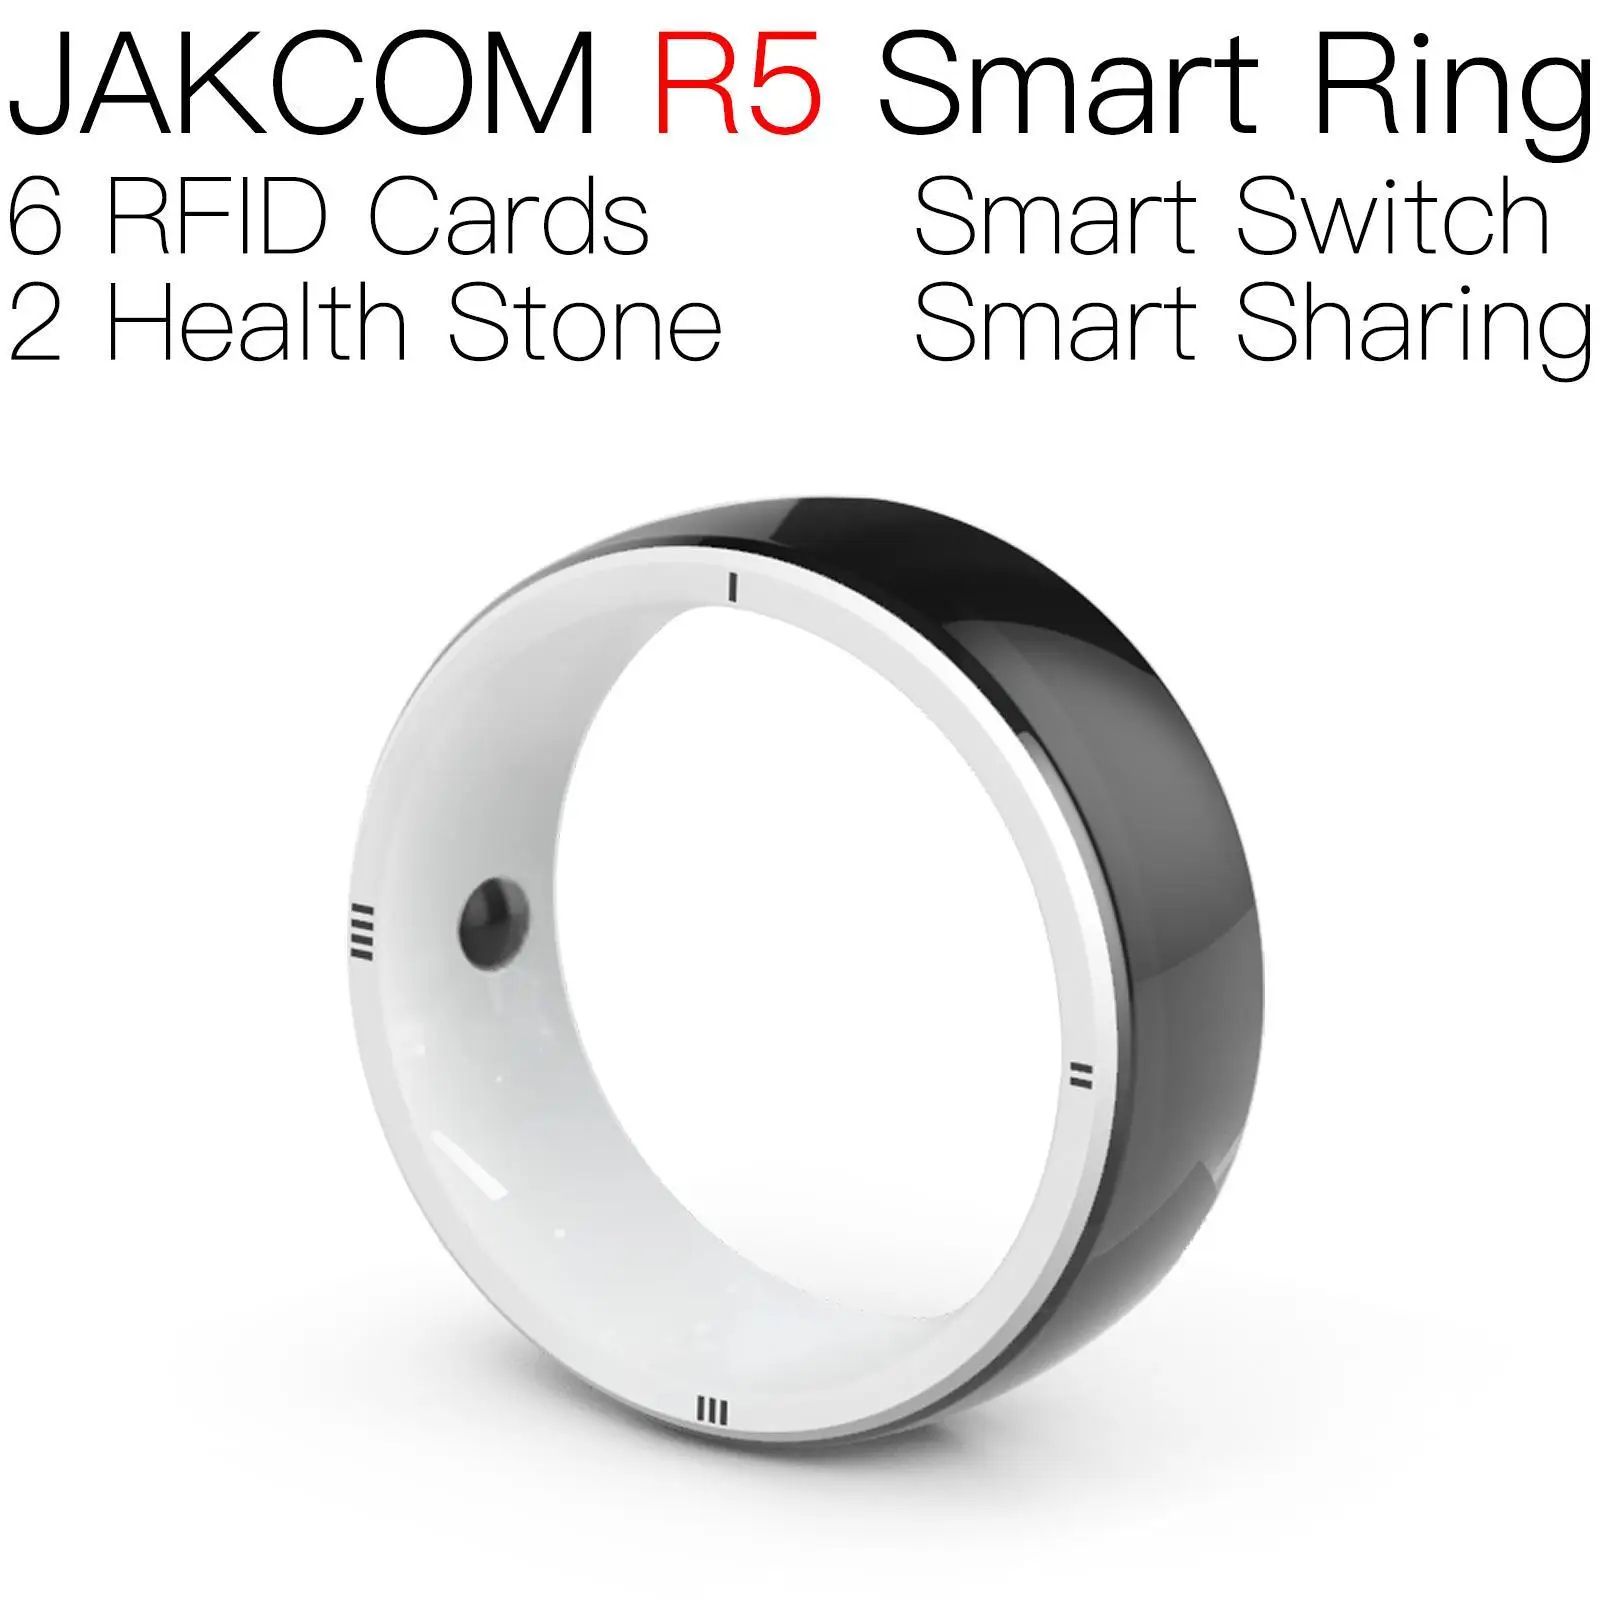 

JAKCOM R5 Smart Ring New arrival as rfid breaker jewellery tags ao veterinary blank cards with chip depuy legend cycling